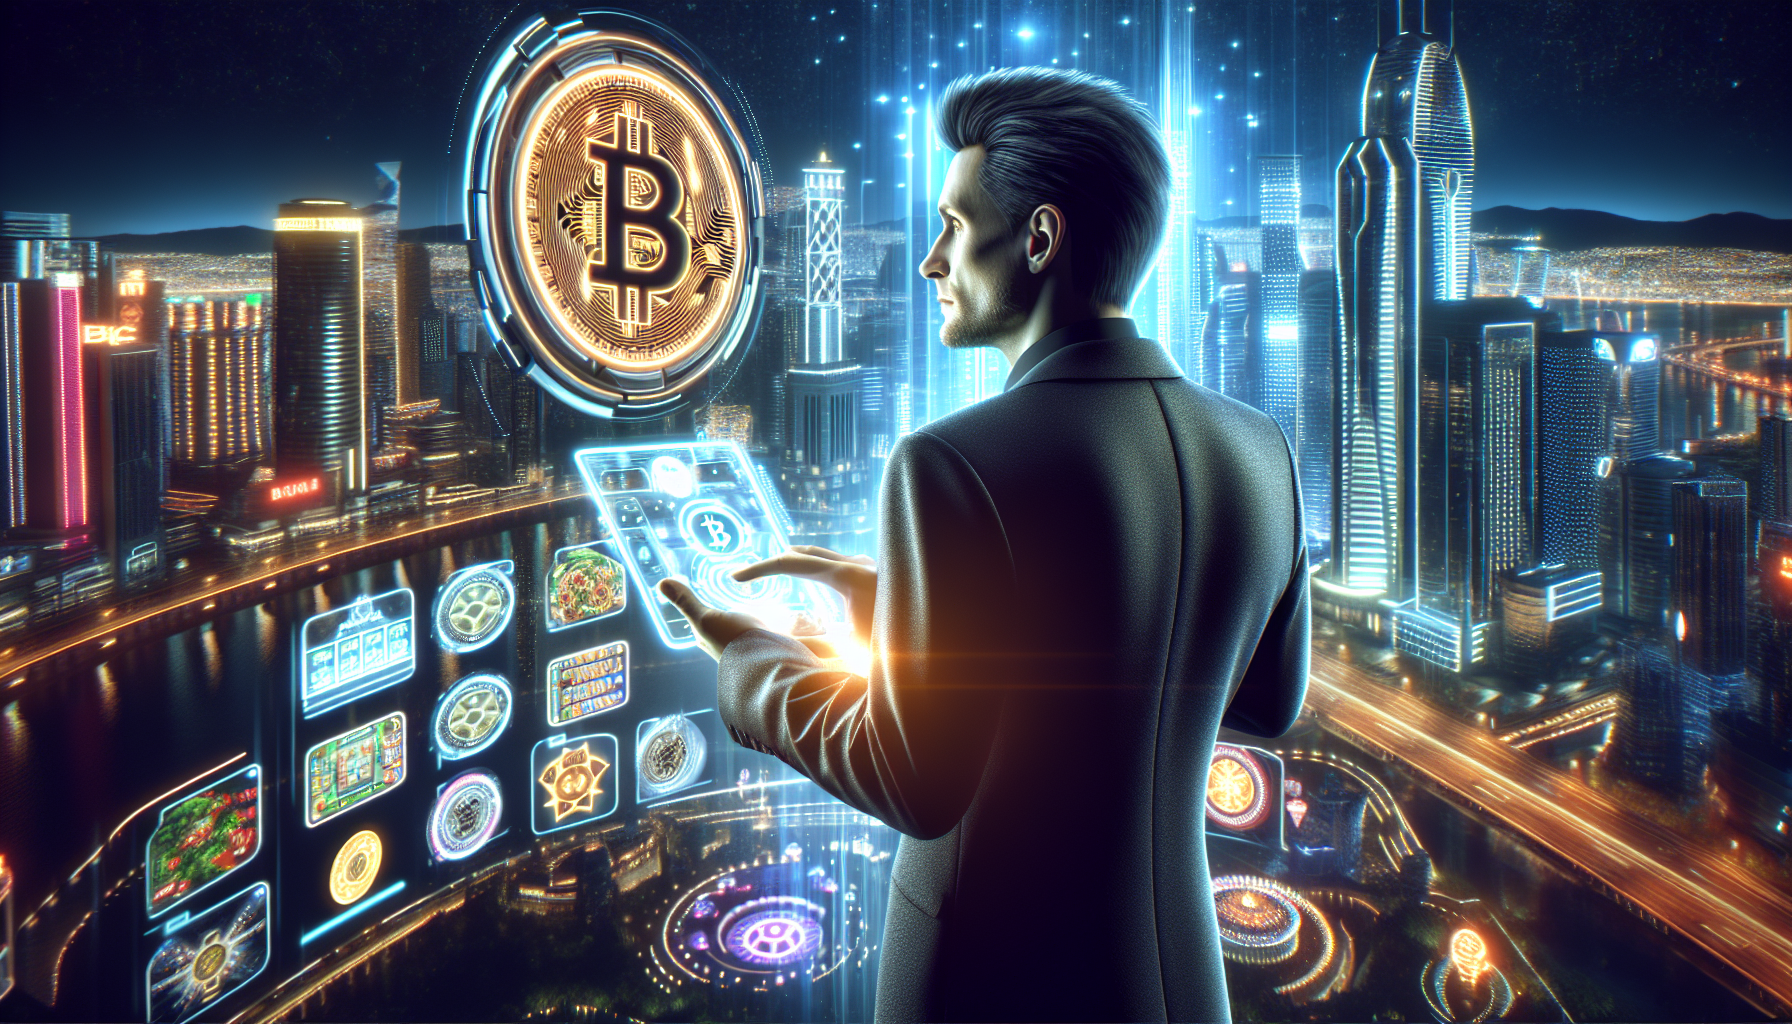 Exploration of Bitcoin gambling and technology